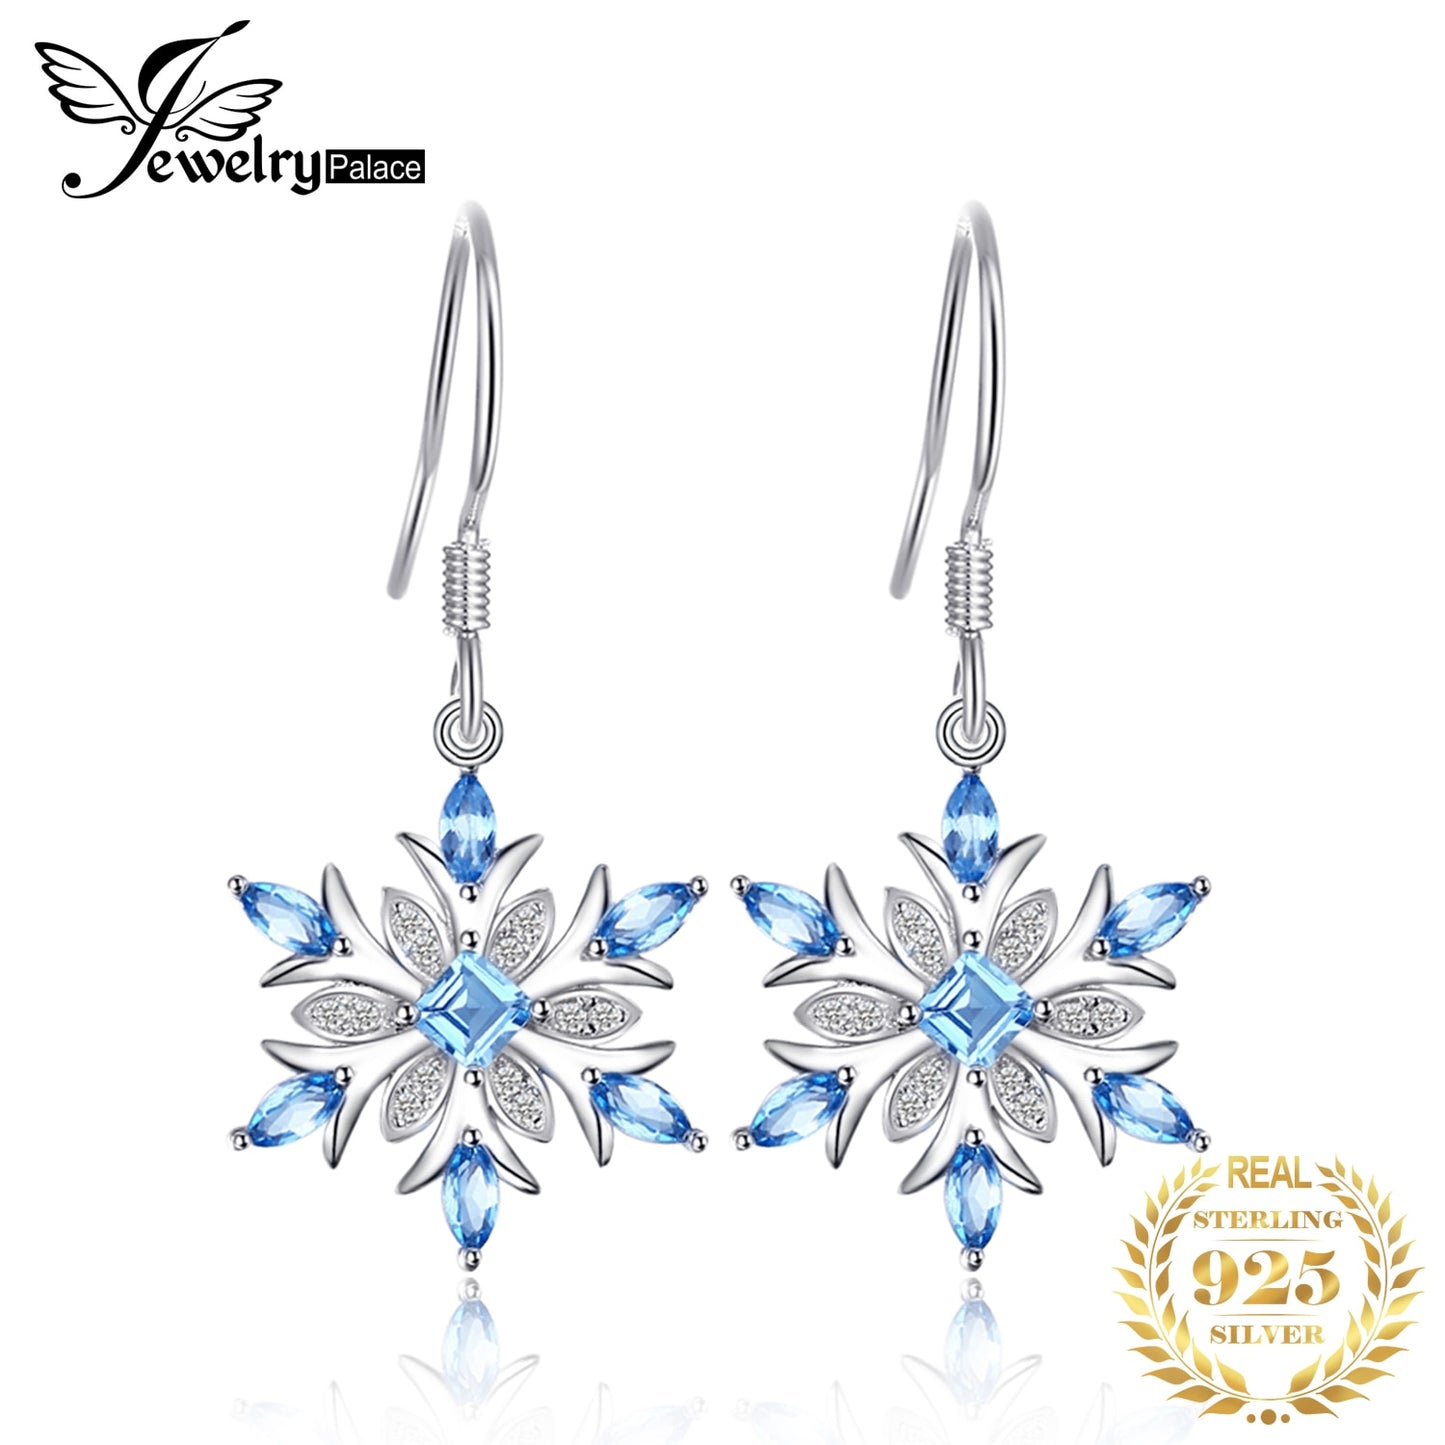 JewelryPalace Snowflake Genuine Blue Topaz 925 Sterling Silver Drop Earrings for Women Gemstone Fine Jewelry Anniversary Gift Default Title